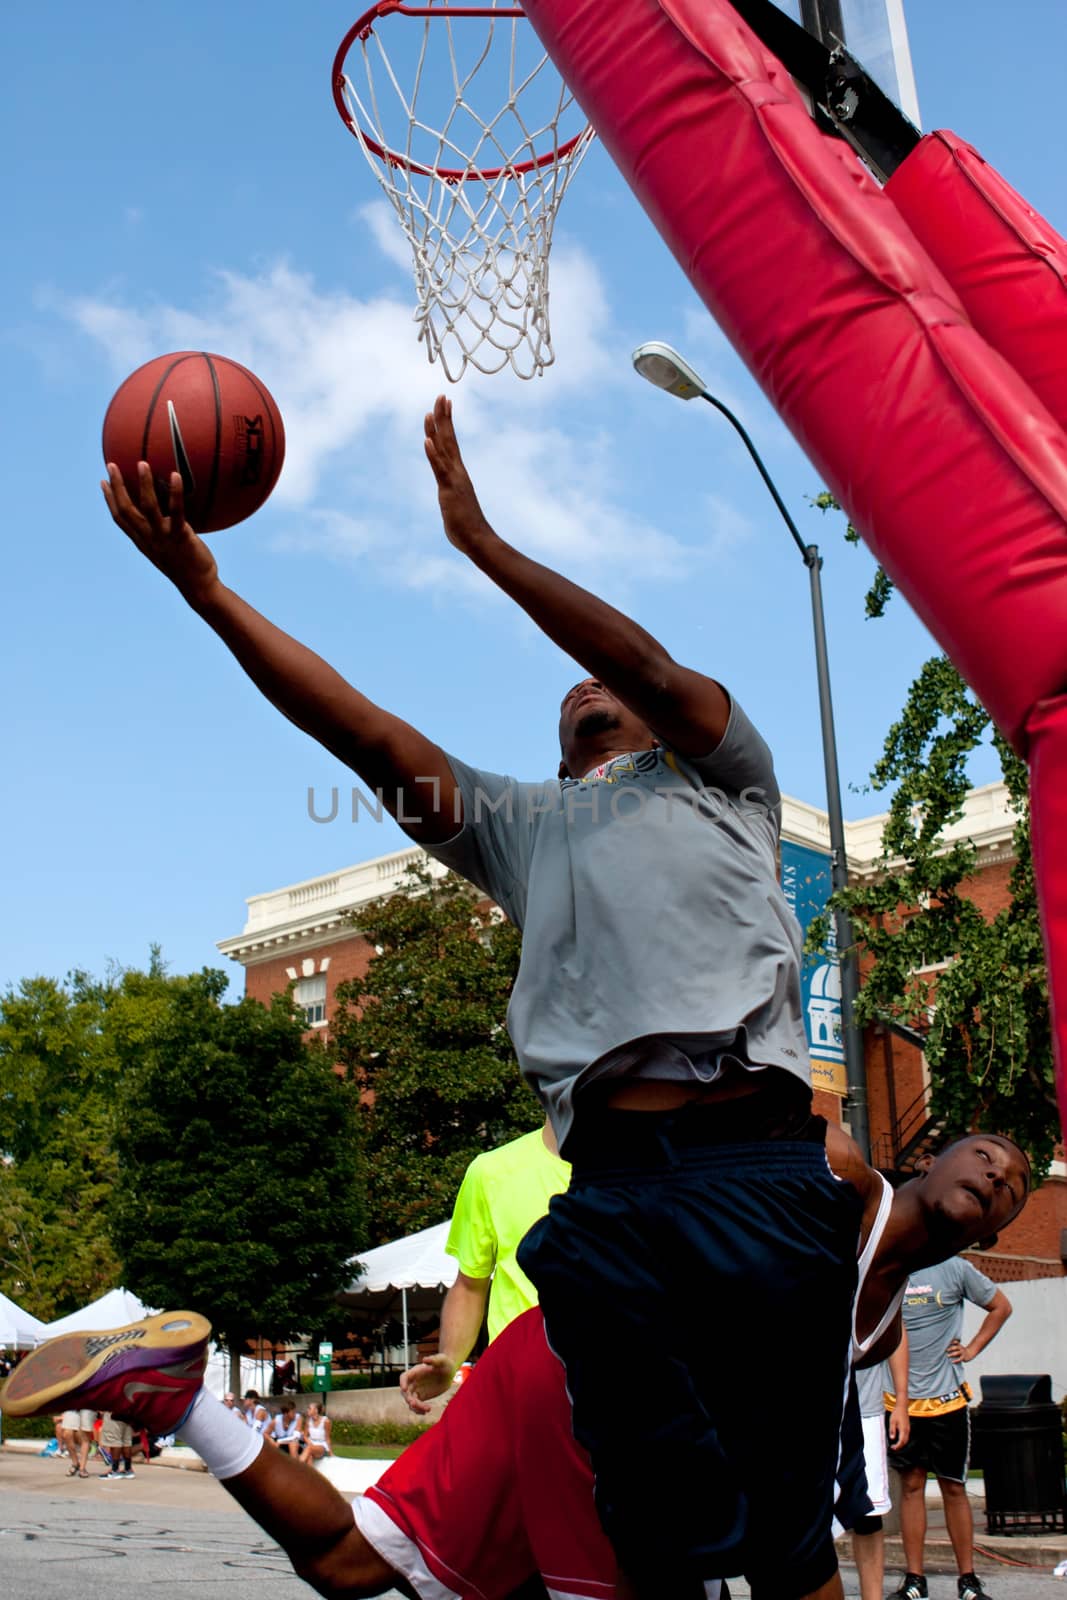 Athens, GA, USA - August 24, 2013:  A young man shoots a reverse layup in a 3-on-3 basketball tournament held on the streets of downtown Athens.